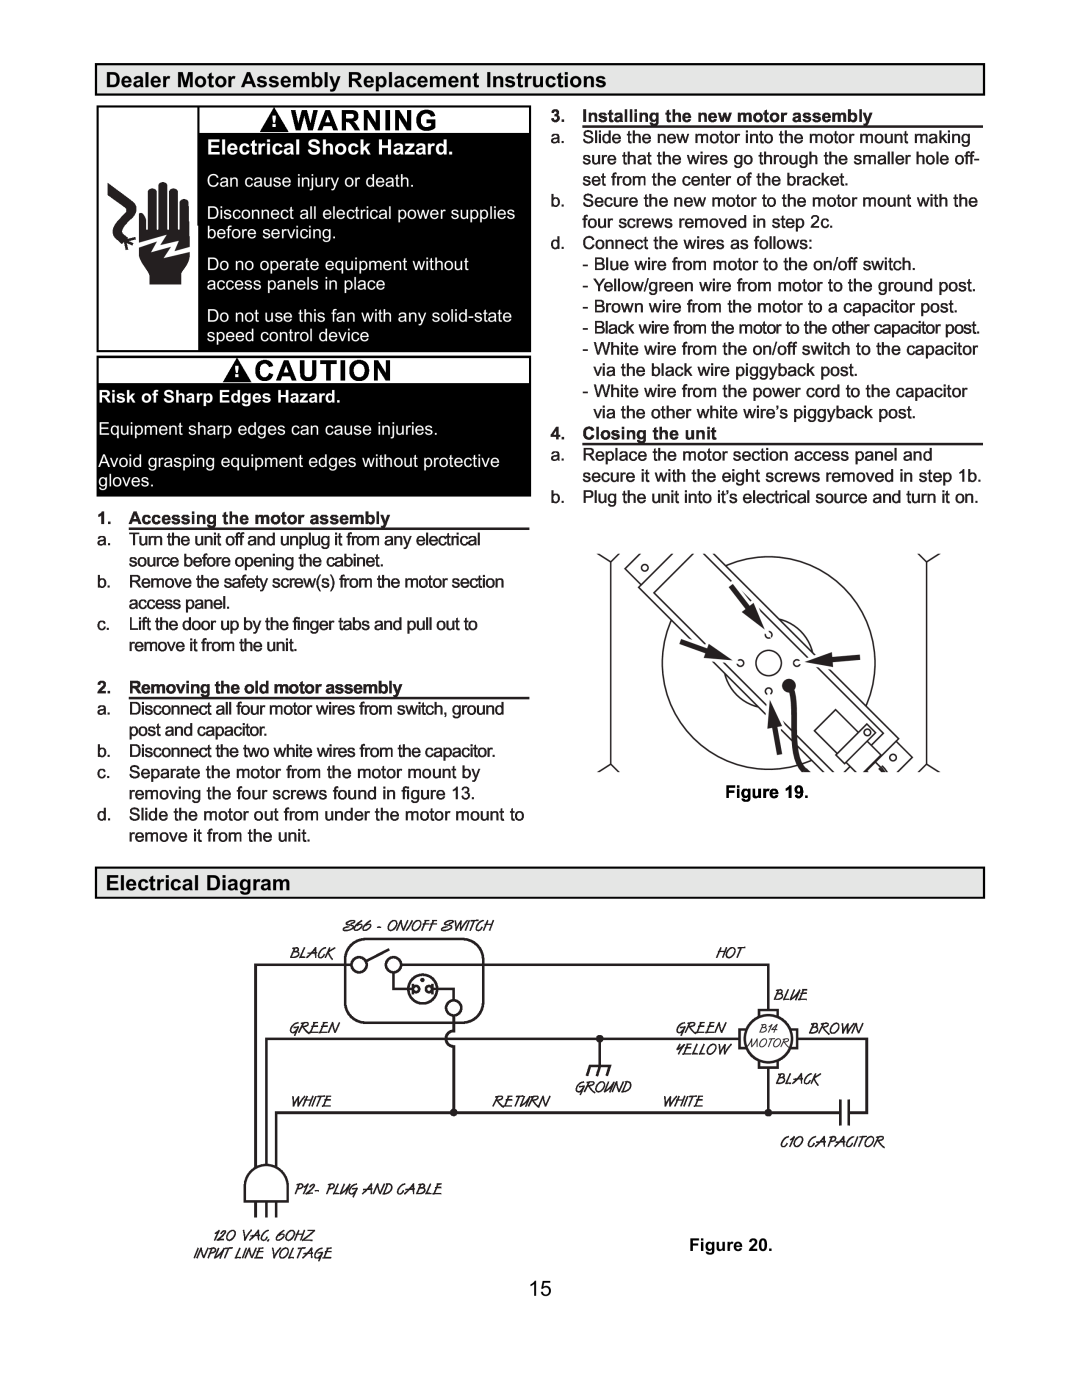 Americair 8500 & 10000 Dealer Motor Assembly Replacement Instructions, Electrical Diagram, Accessing the motor assembly 